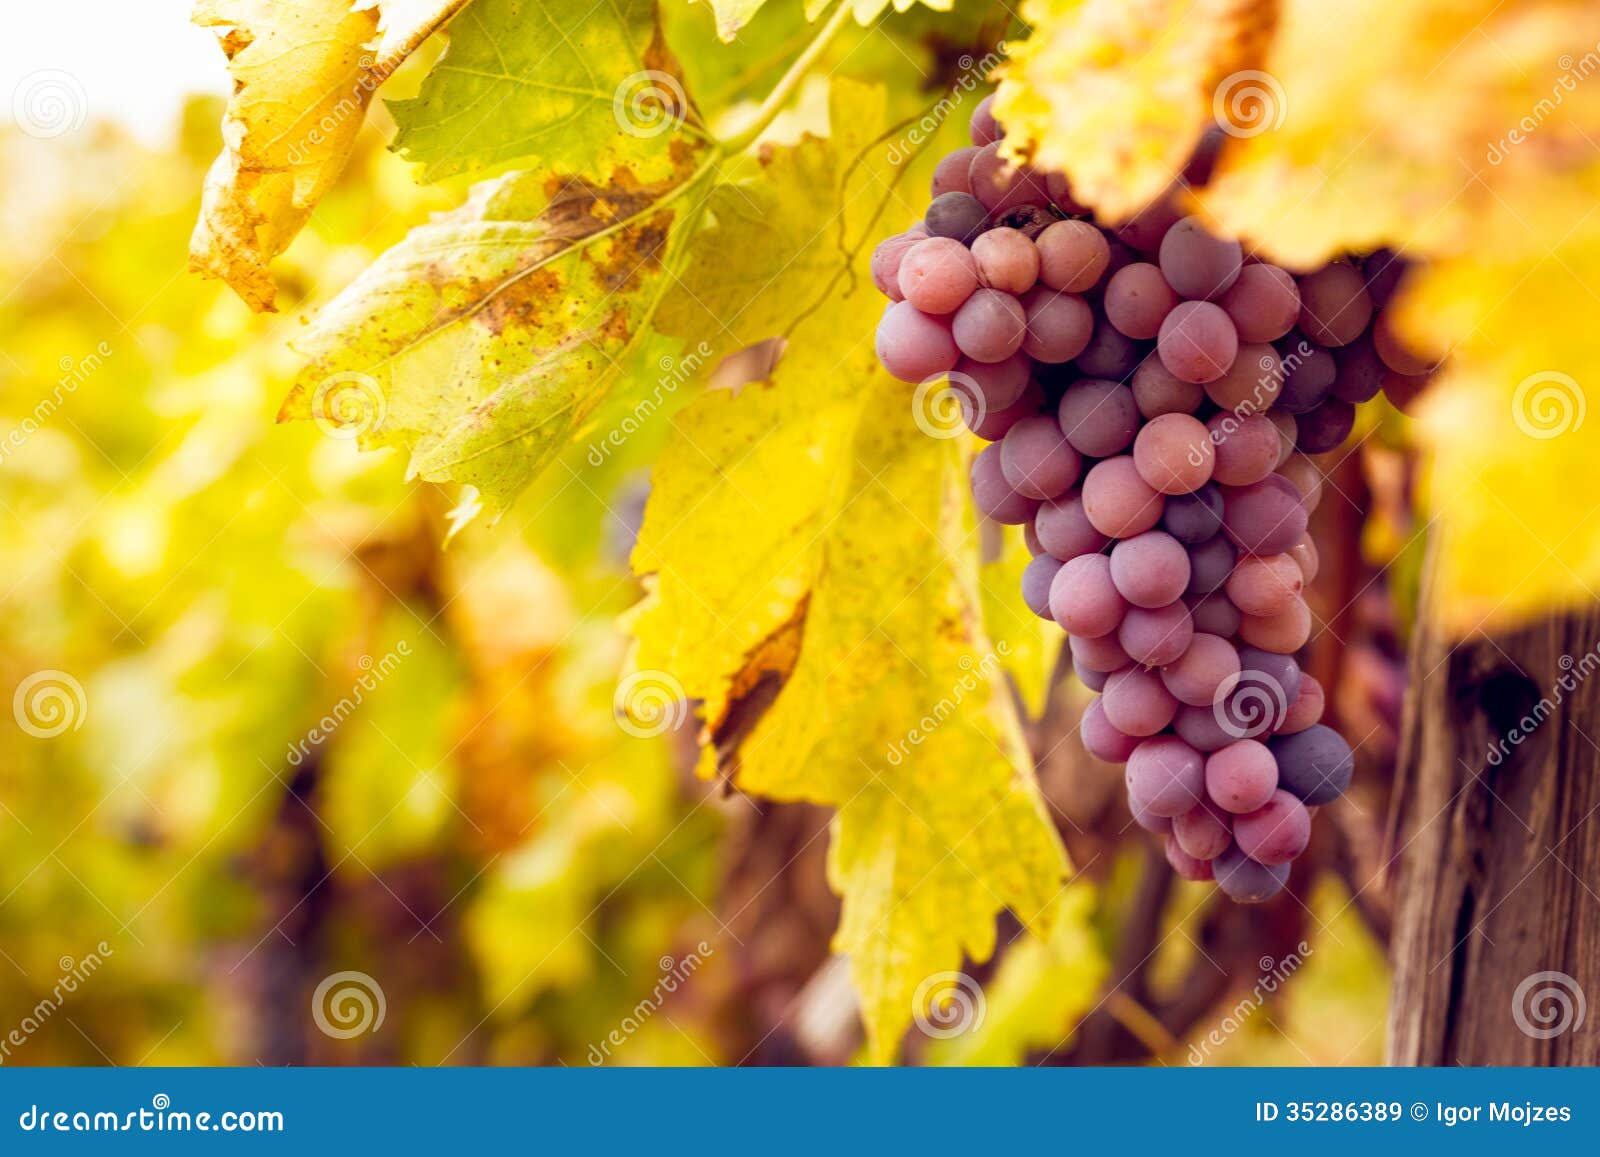 bunch of red wine grapes